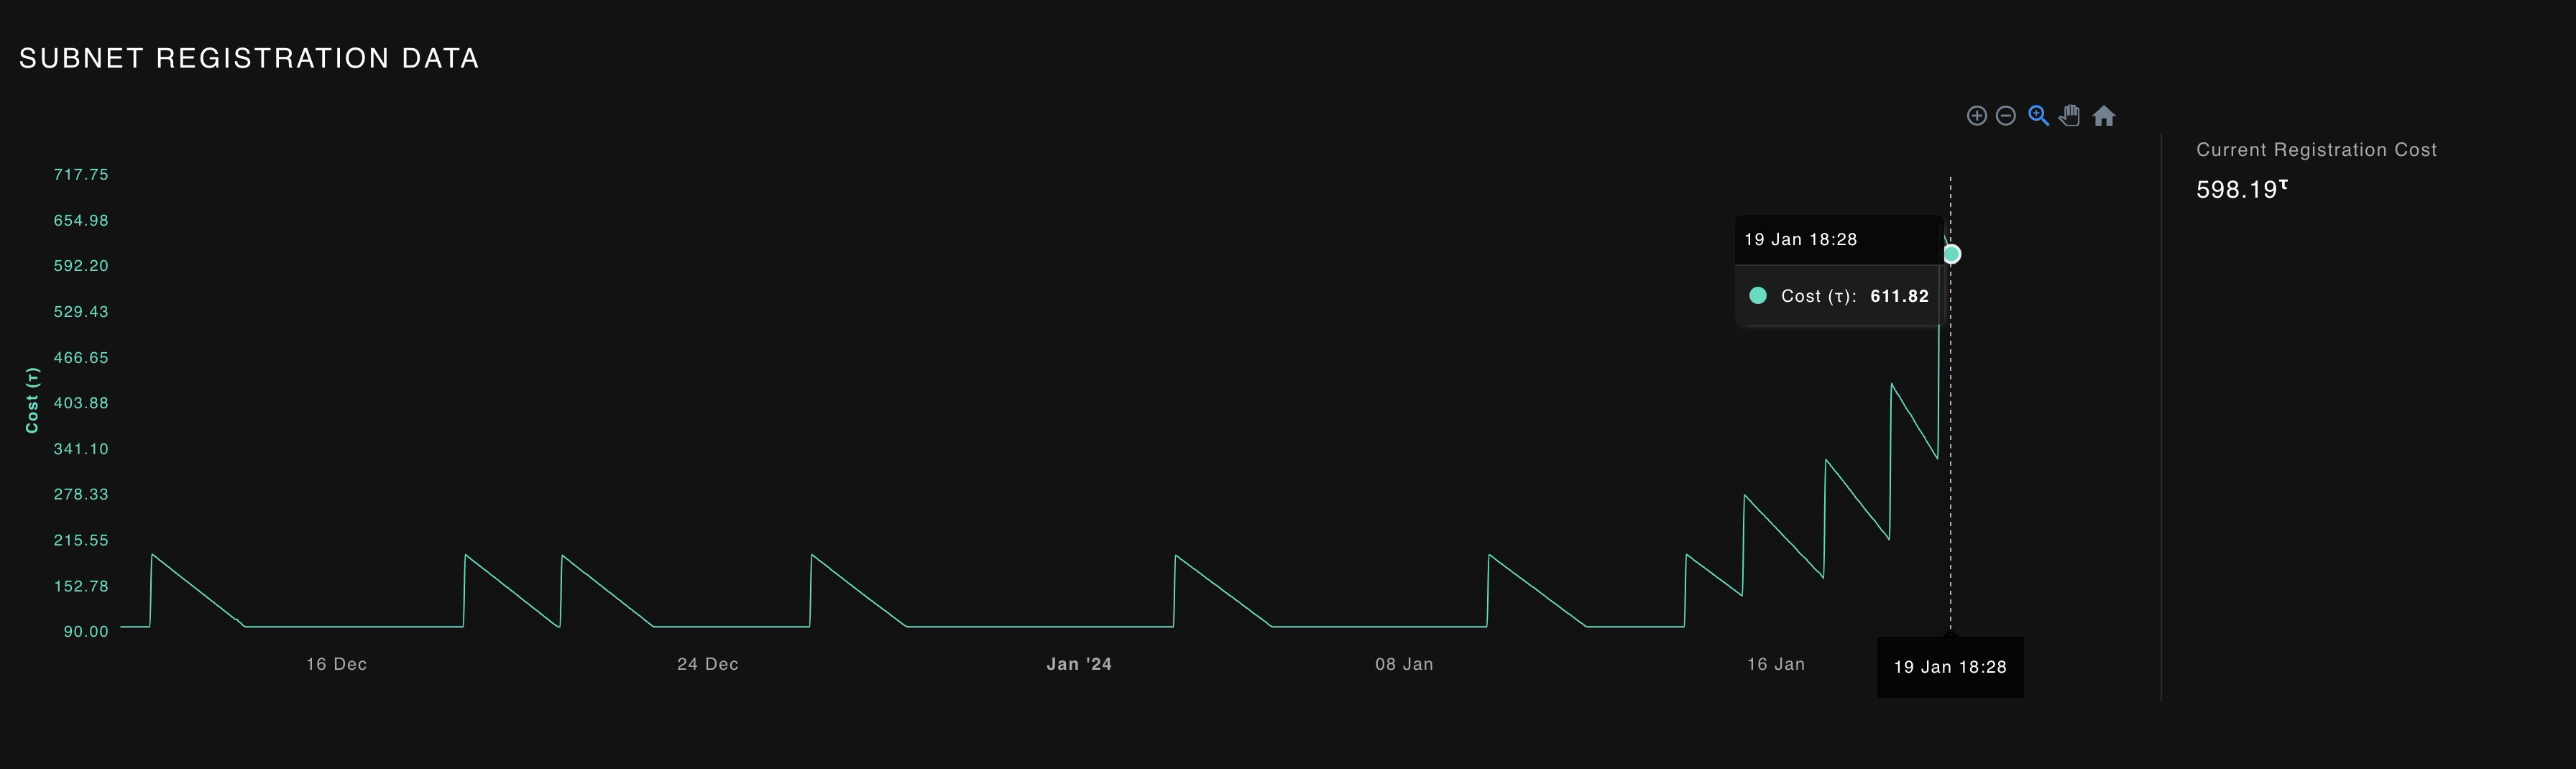 A screenshot of the Subnet registration cost over time.